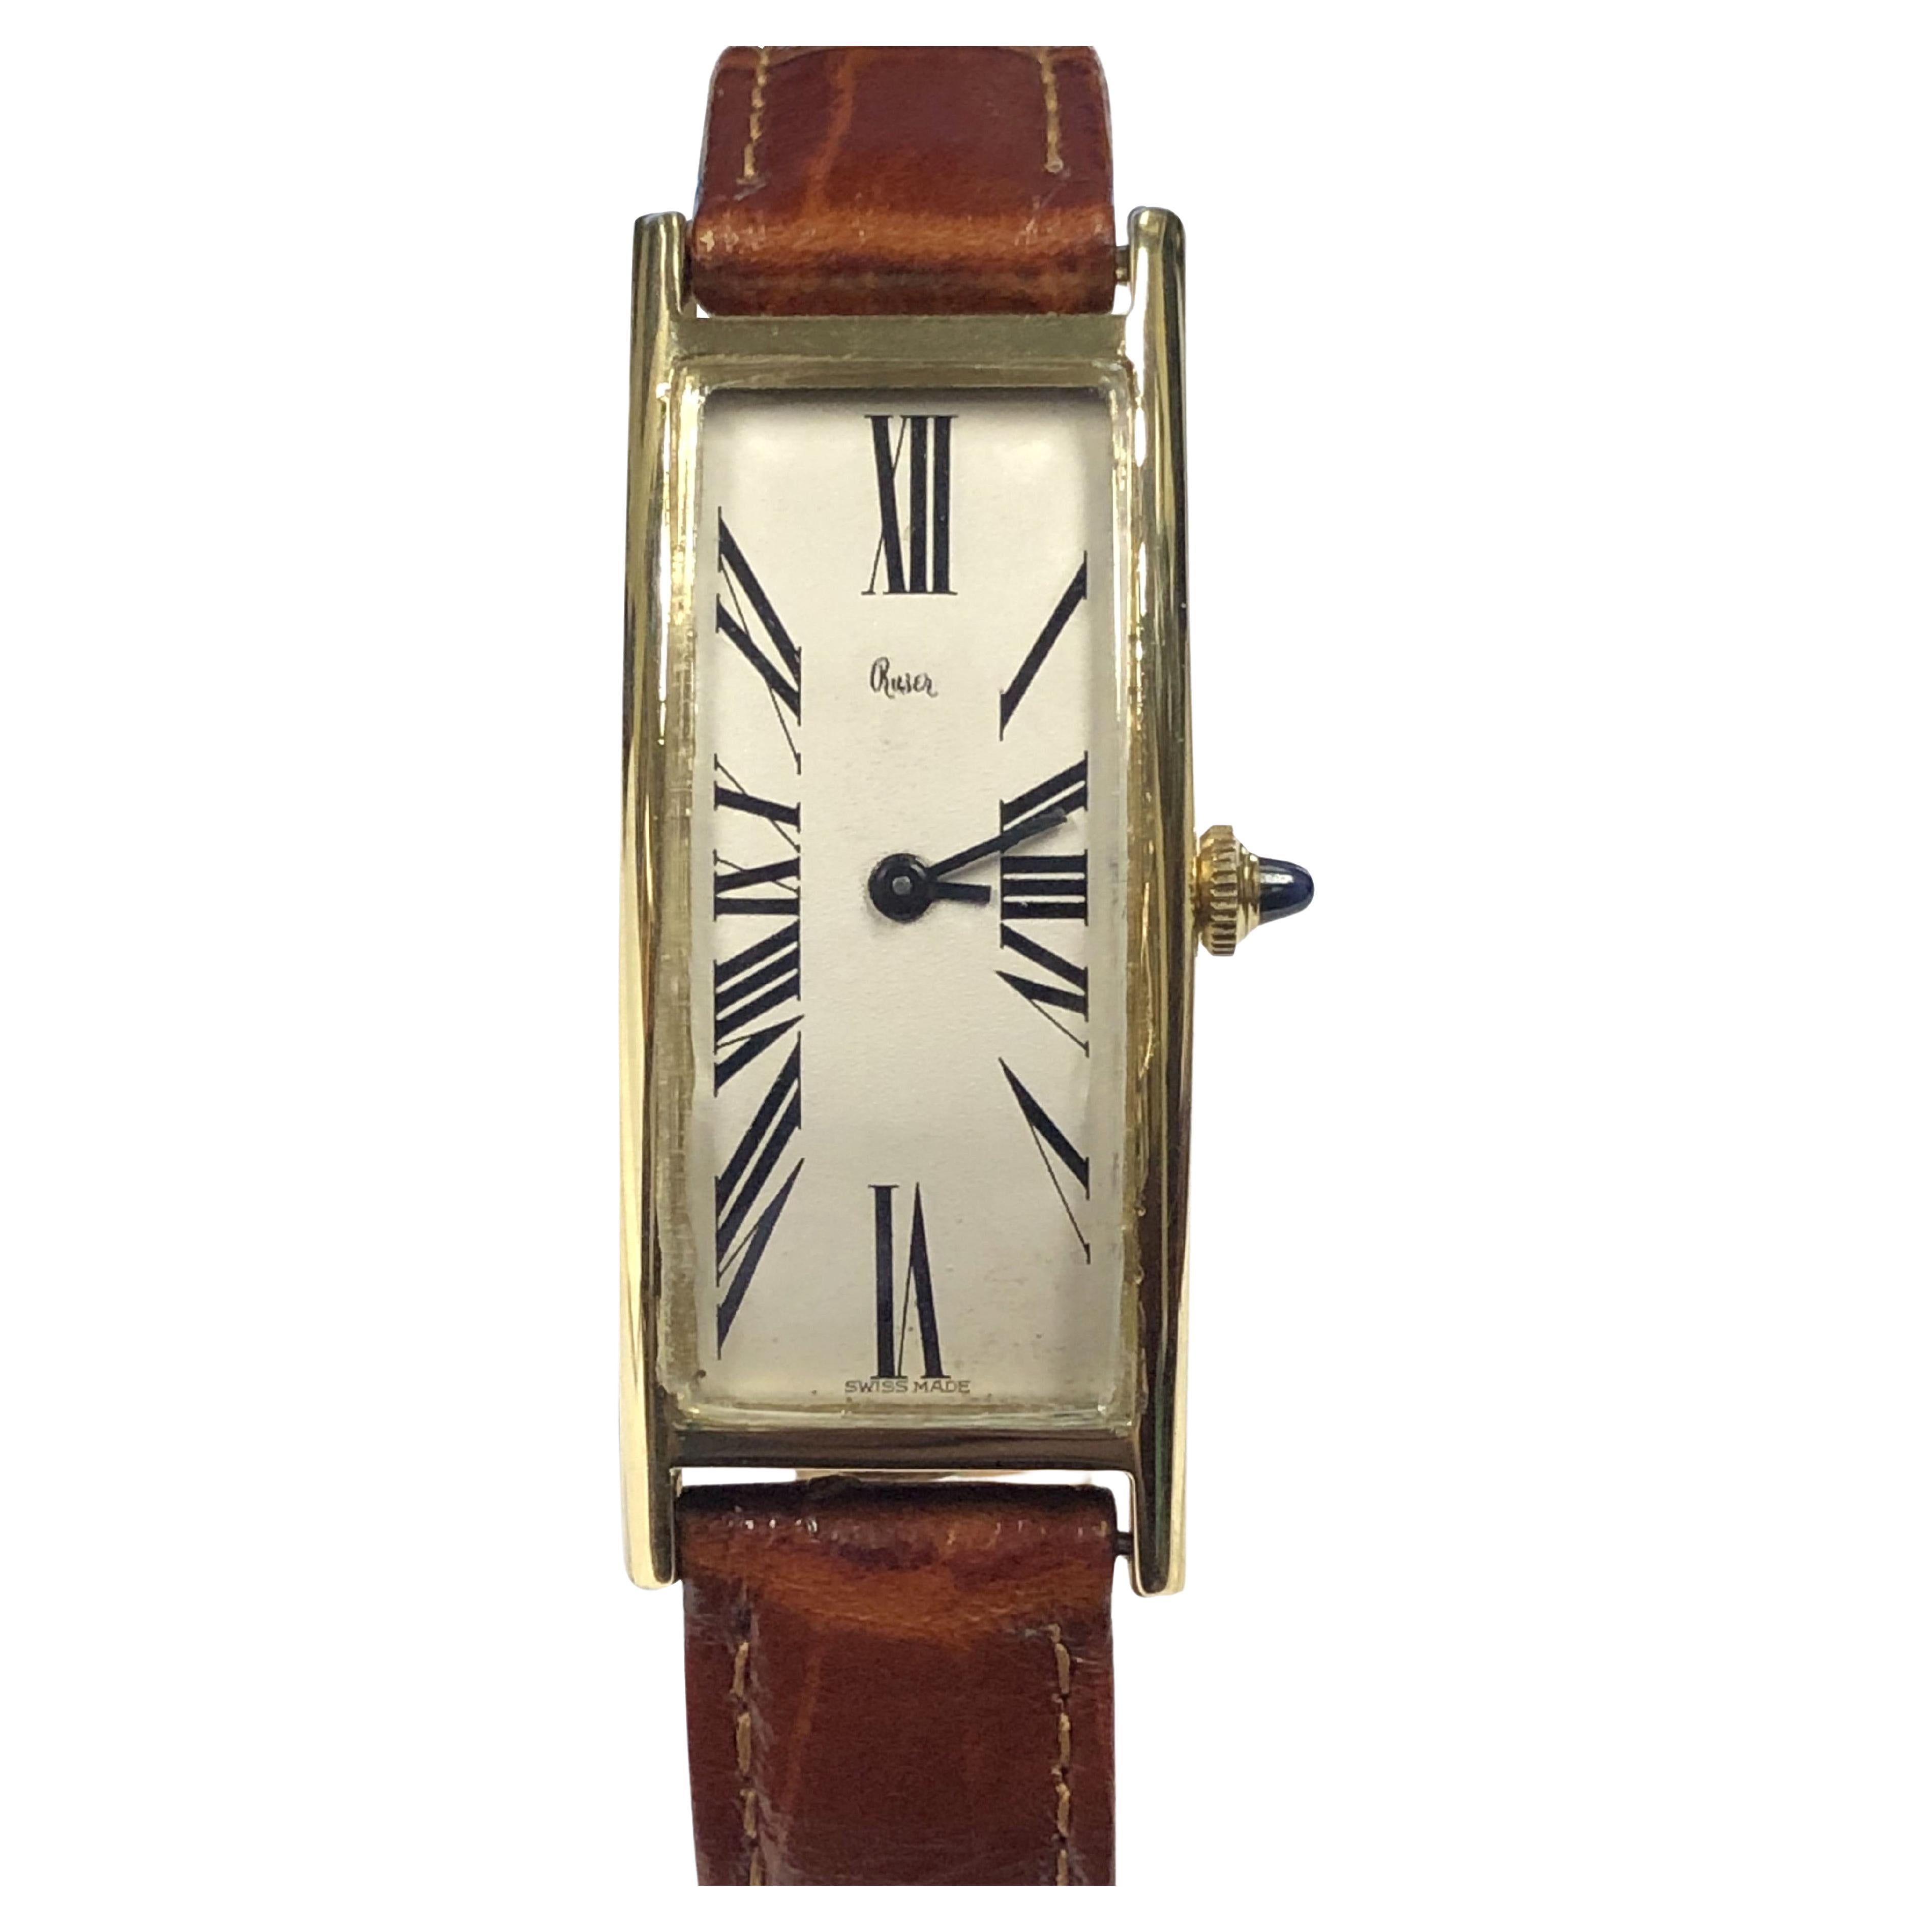 Bueche Girod for Ruser Elongated Yellow Gold Watch Owned and Worn by Jerry Lewis